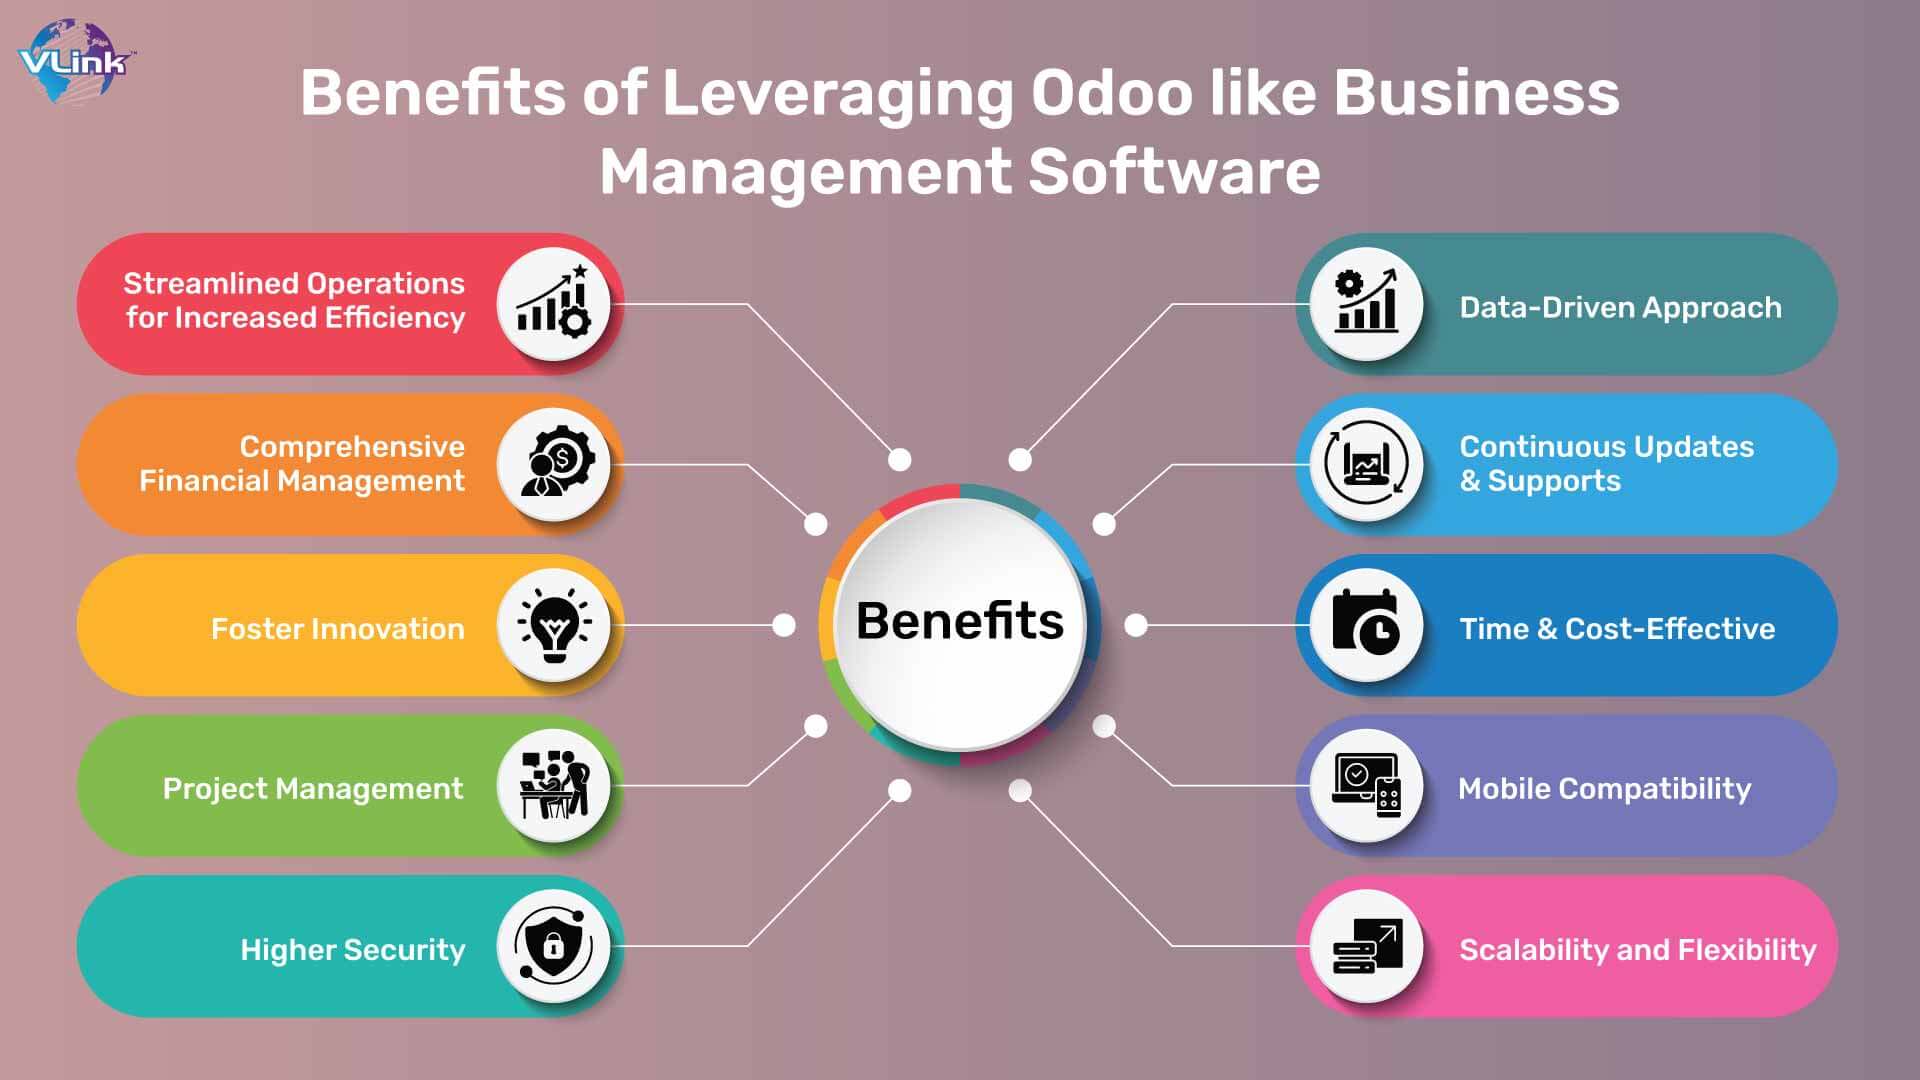 Benefits of Leveraging Odoo like Business Management Software 